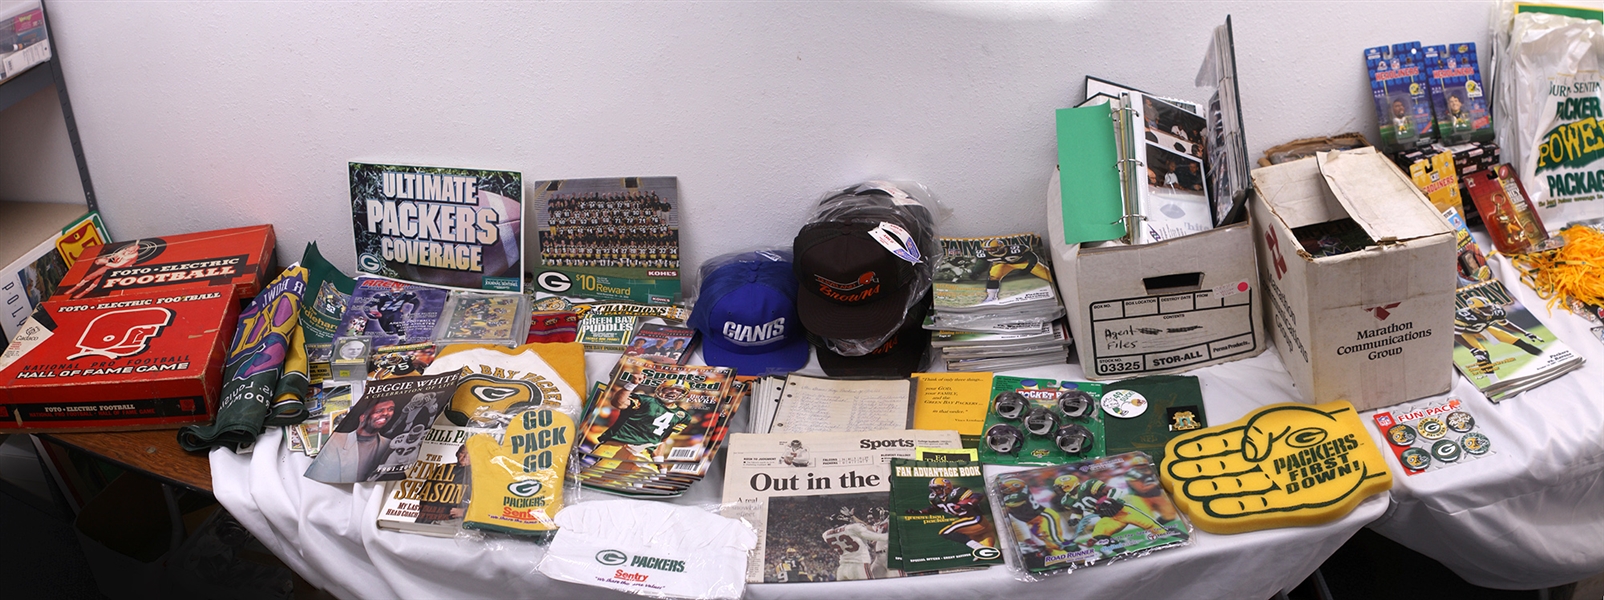 1980s – 2000s Green Bay Packers and Football Memorabilia (Lot of 250+)